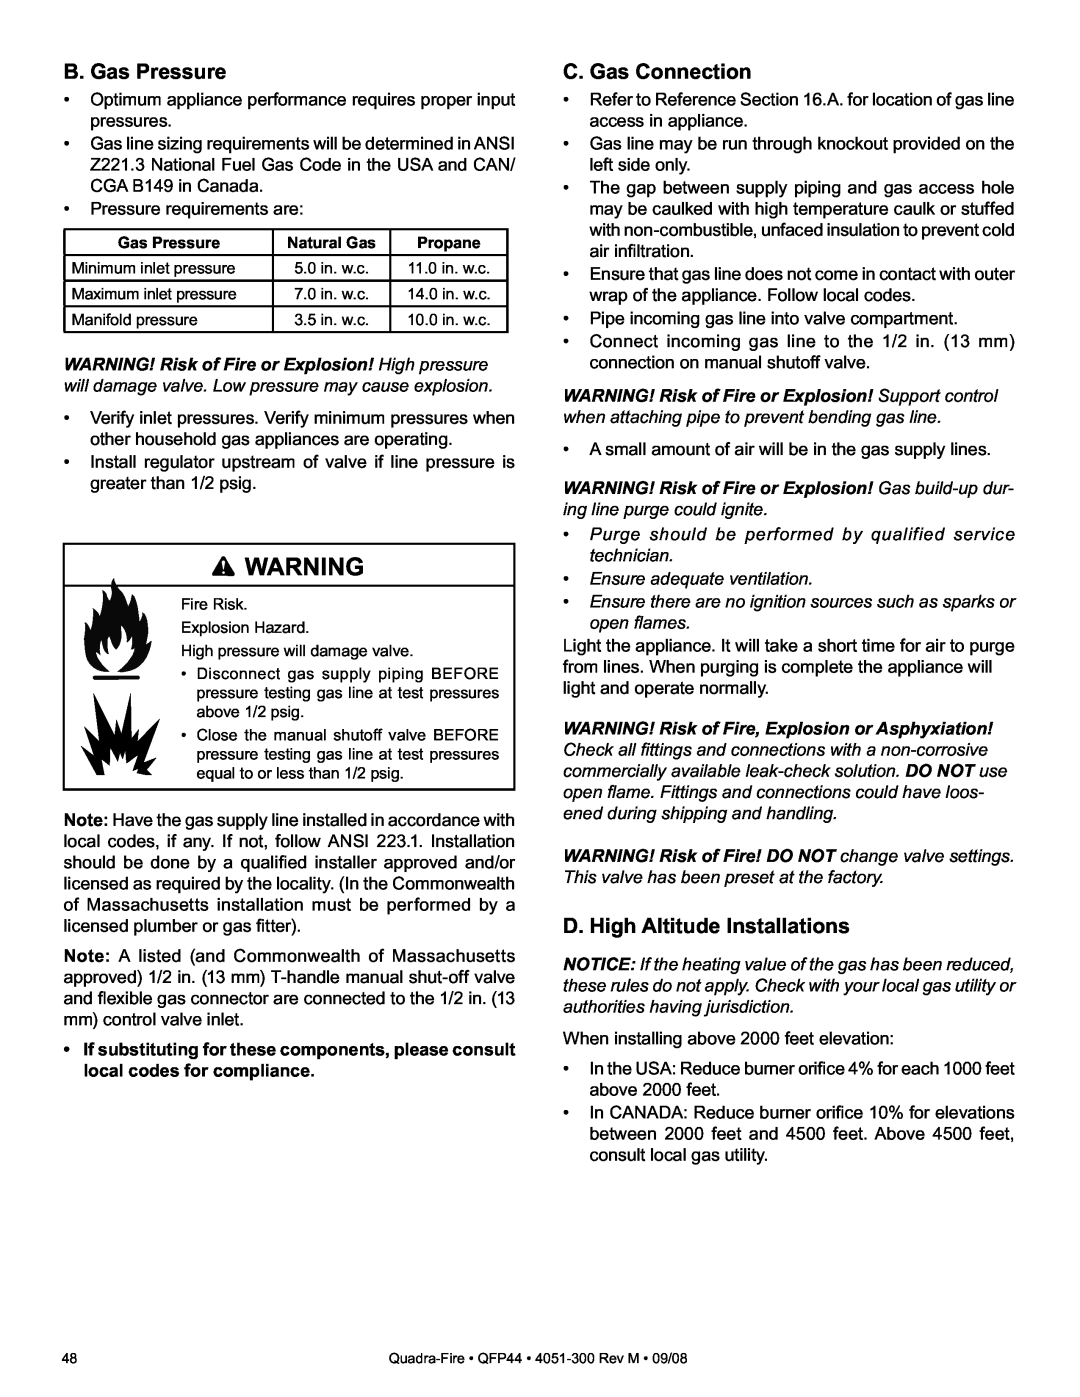 Quadra-Fire QFP44 owner manual B. Gas Pressure, C. Gas Connection, D. High Altitude Installations 